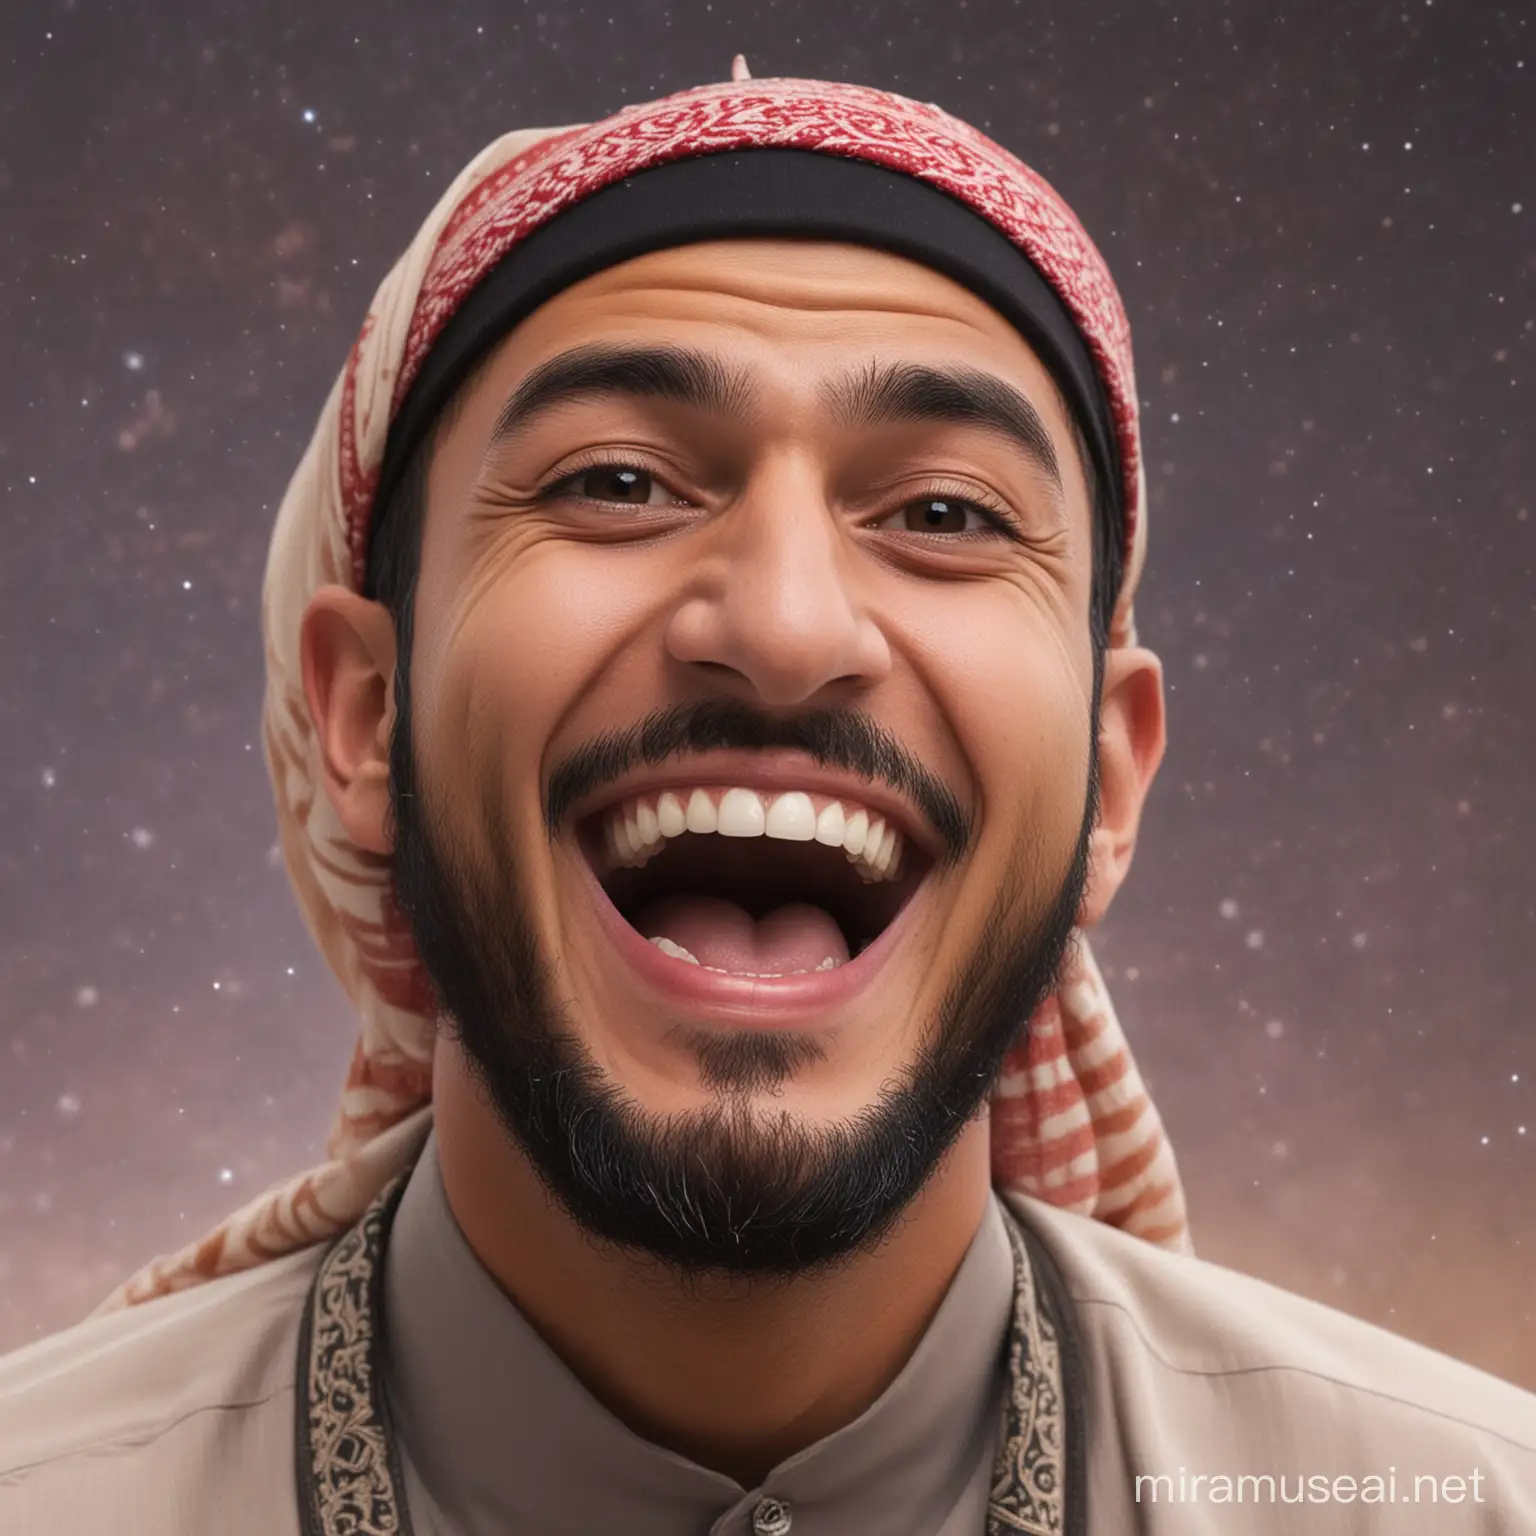 Muslim man laughing extremely hilariously out of the universe 